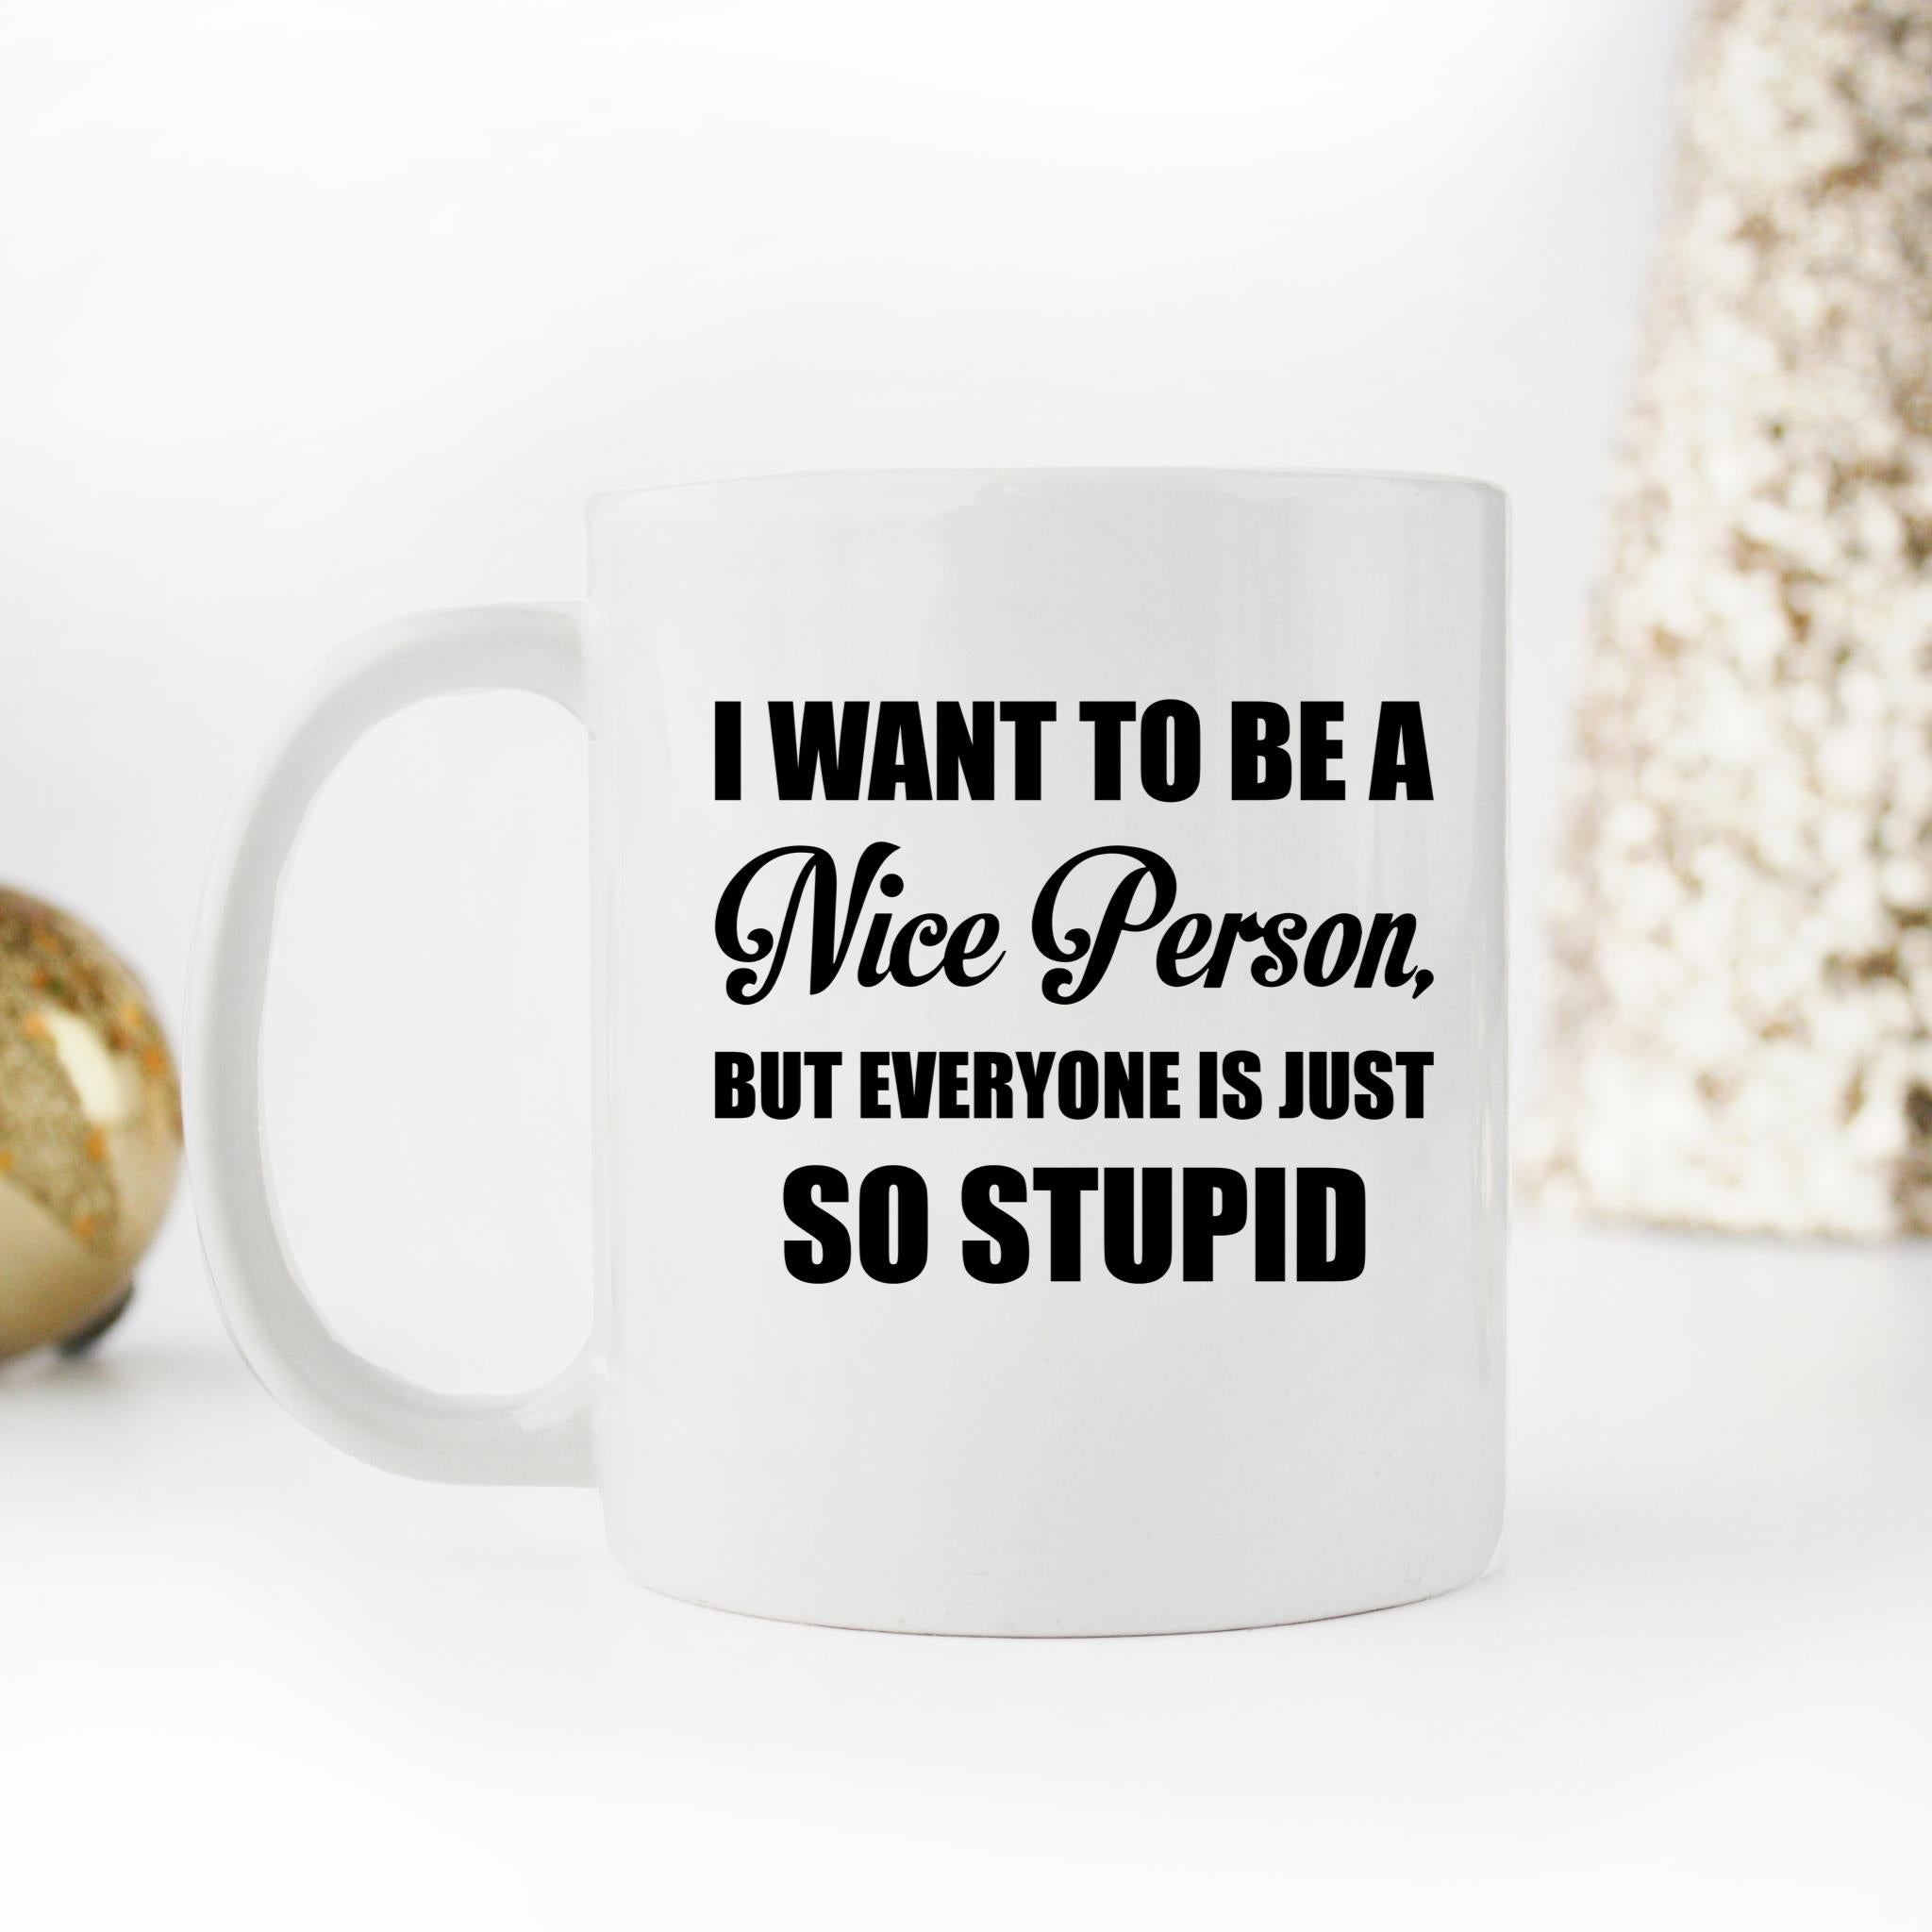 Skitongifts Funny Ceramic Novelty Coffee Mug I Want To Be A Nice Person But Everyone Is Just So Stupid (2) PEI3za2